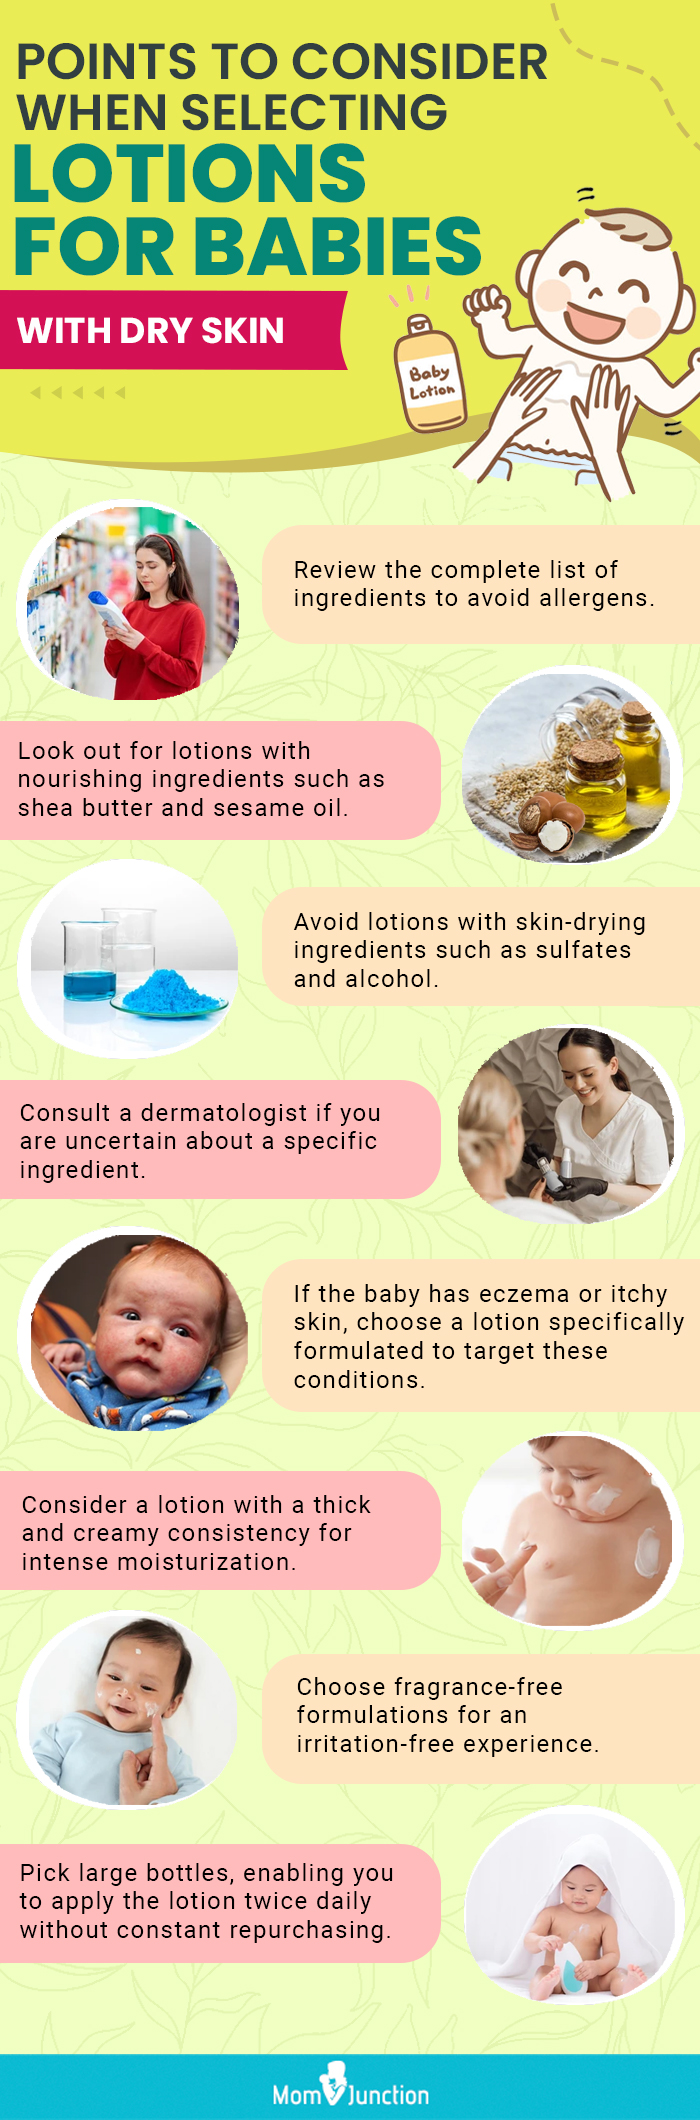 Points To Consider When Selecting Lotions For Babies With Dry Skin. (infographic)